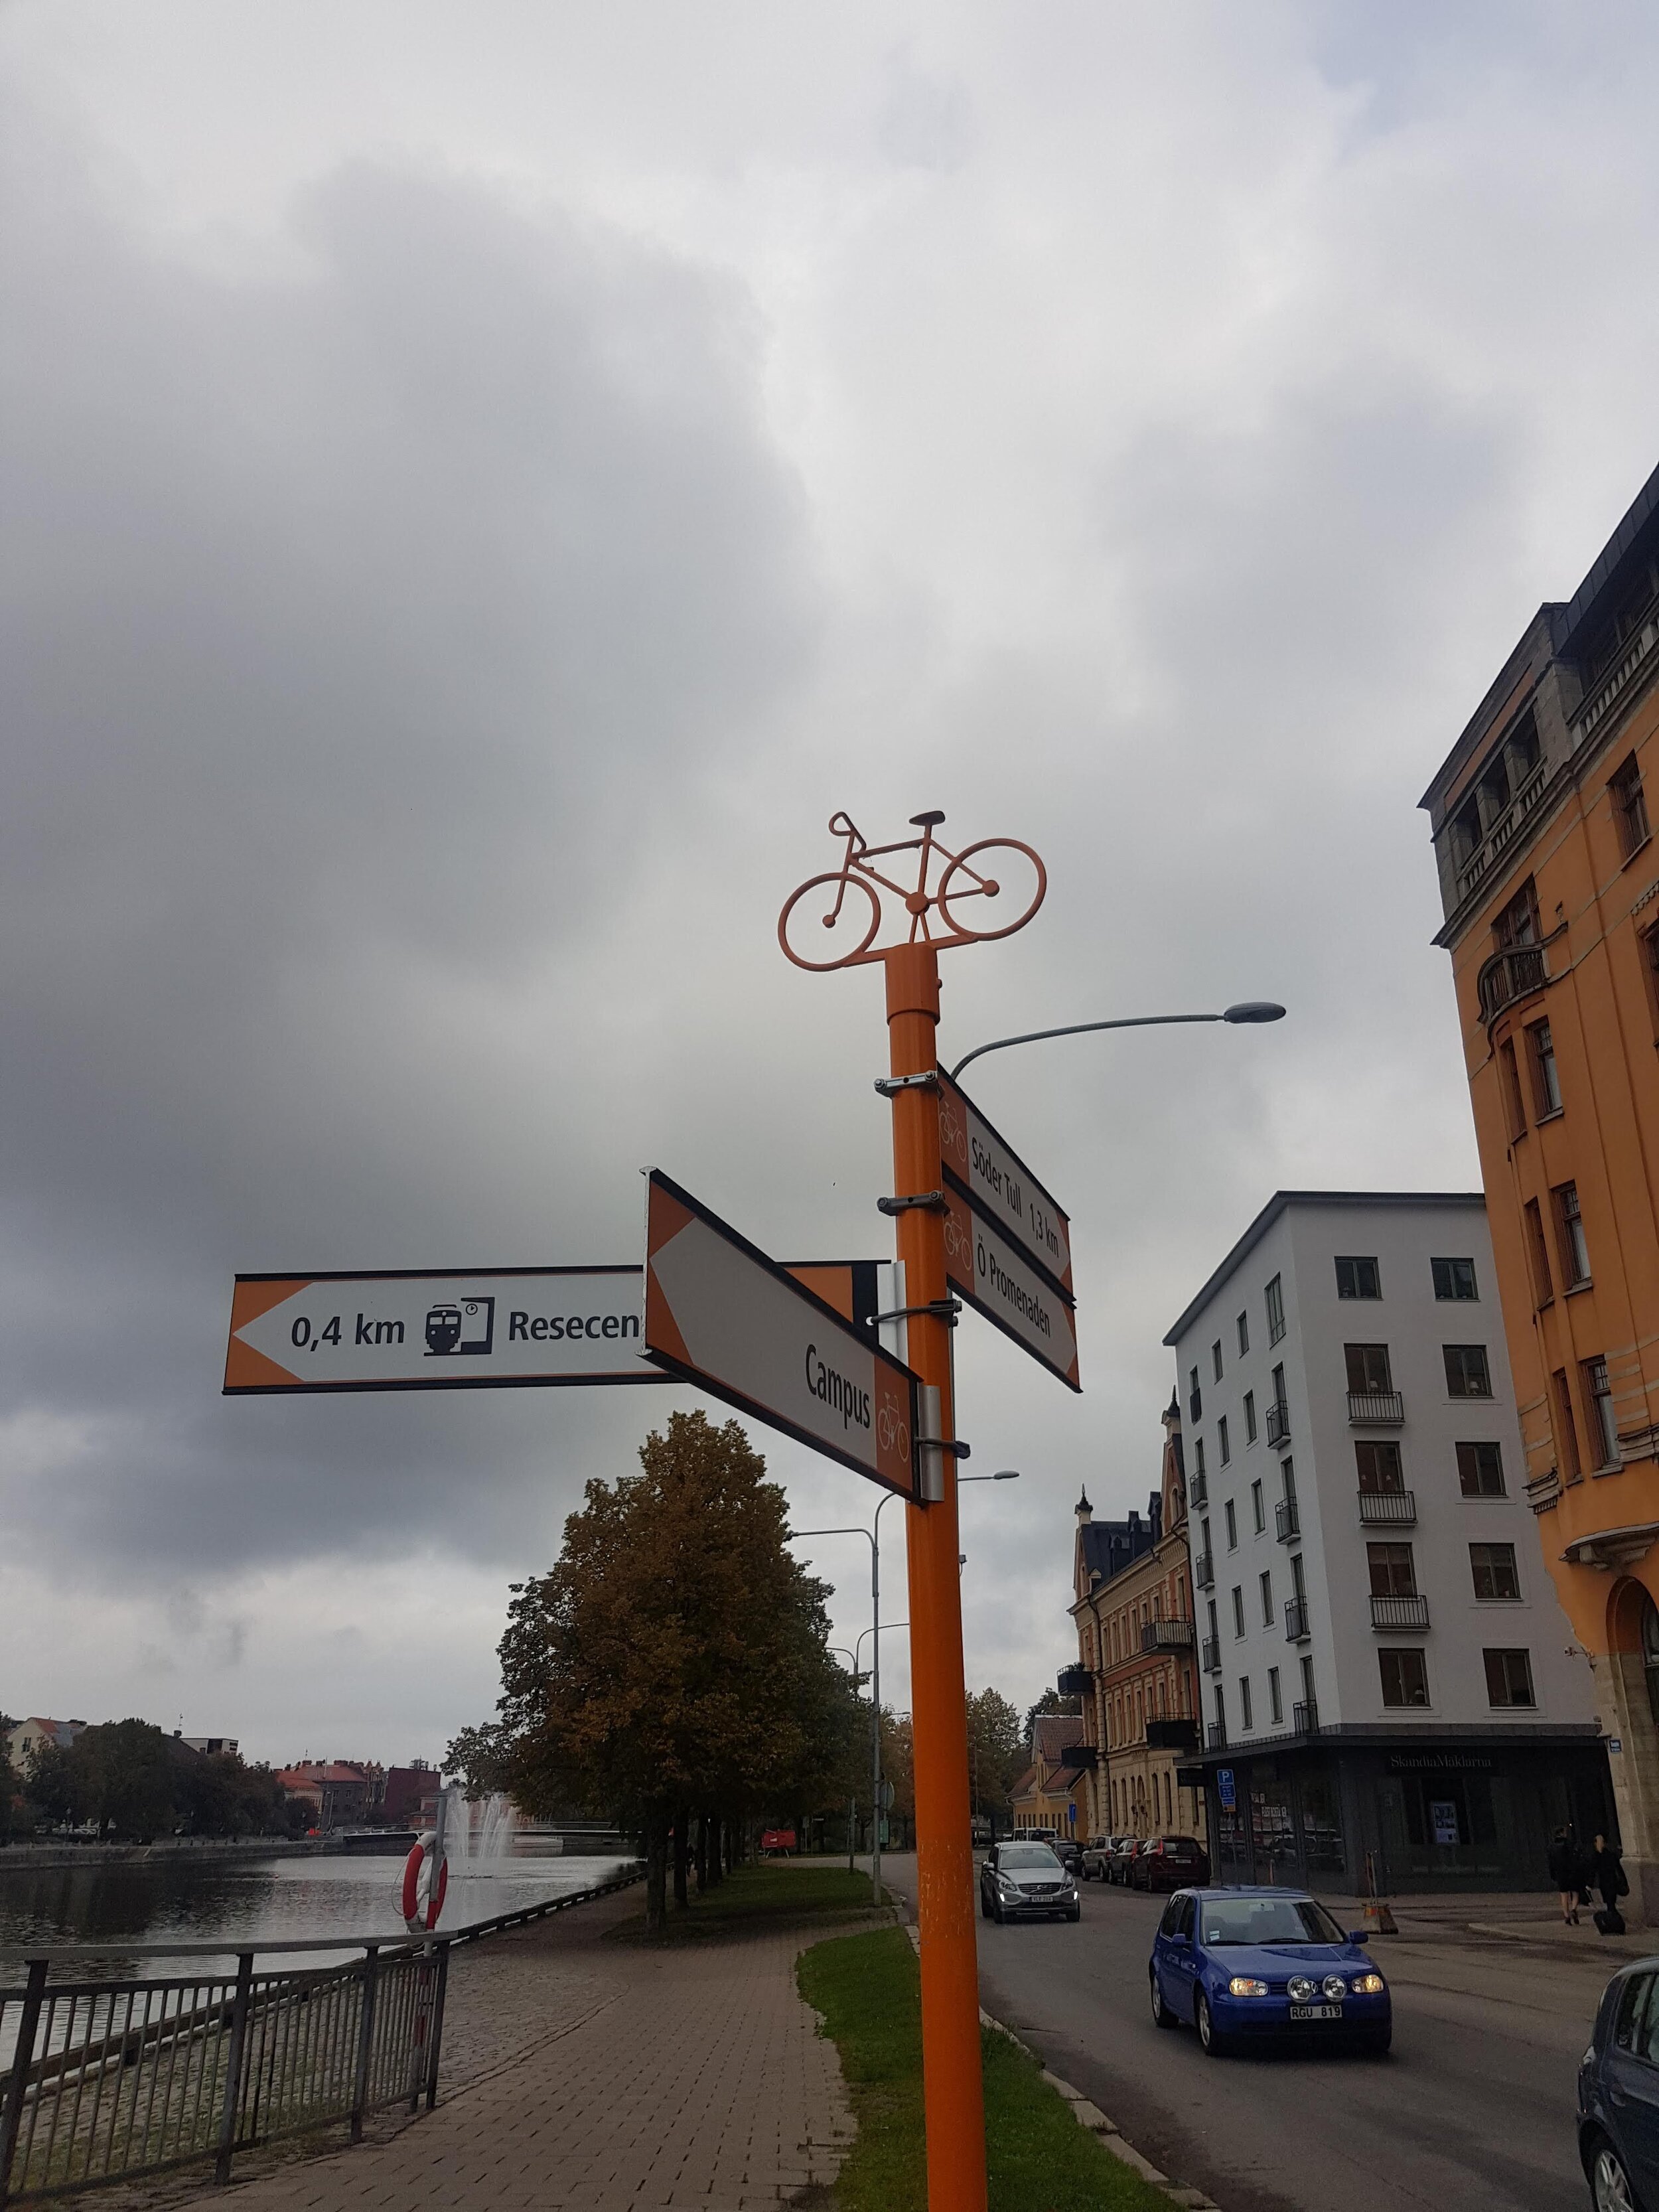 this lovely bike signs